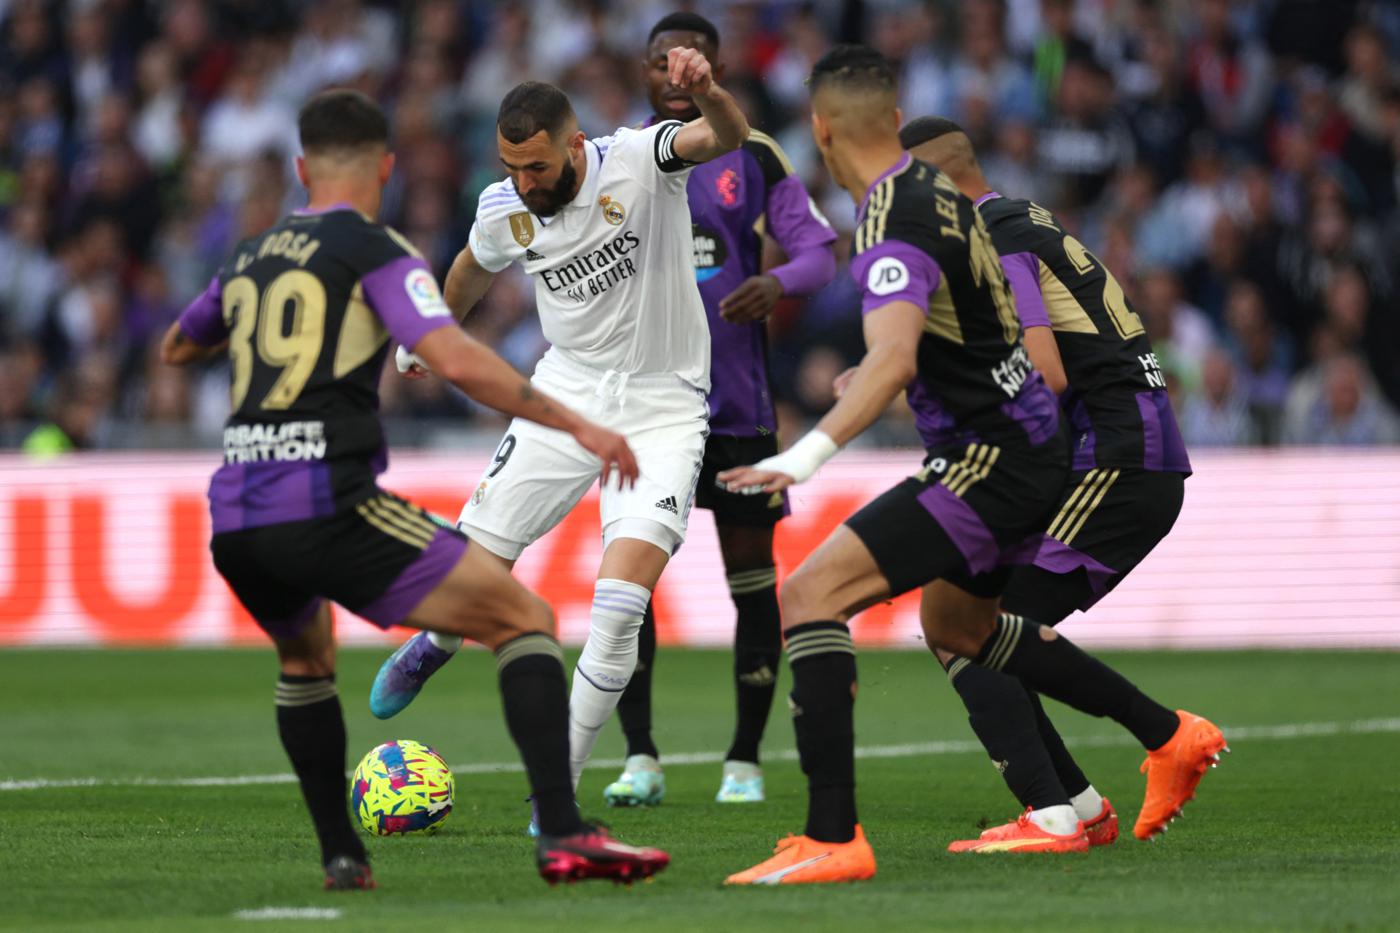 Real - Valladolid - 6:0. Spanish Championship, 27th round. Match review, statistics